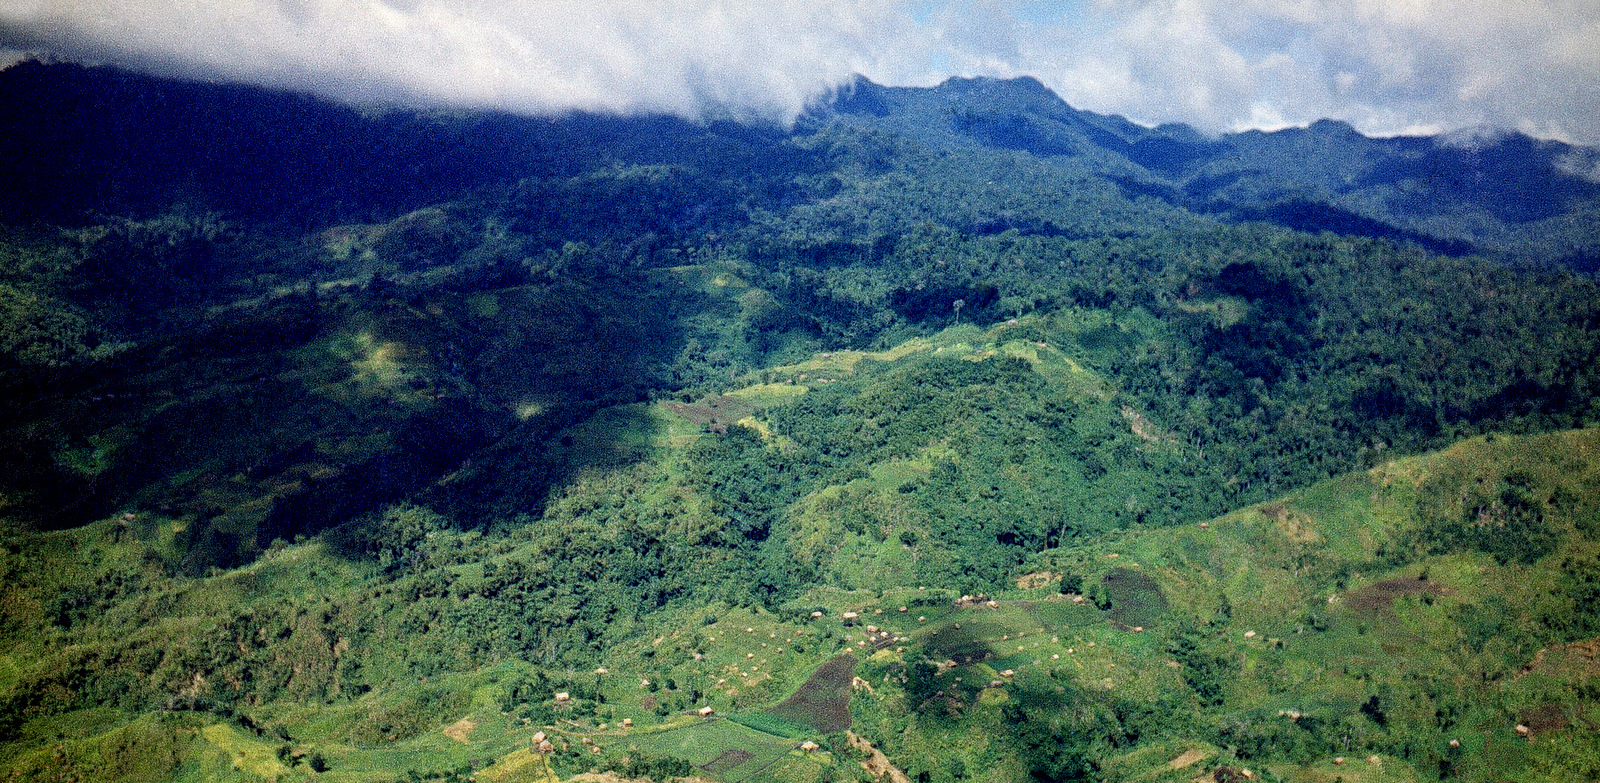 The mountains of the South Cotabato province of Mindanao Island in the southern Philippines. (AP Photo)